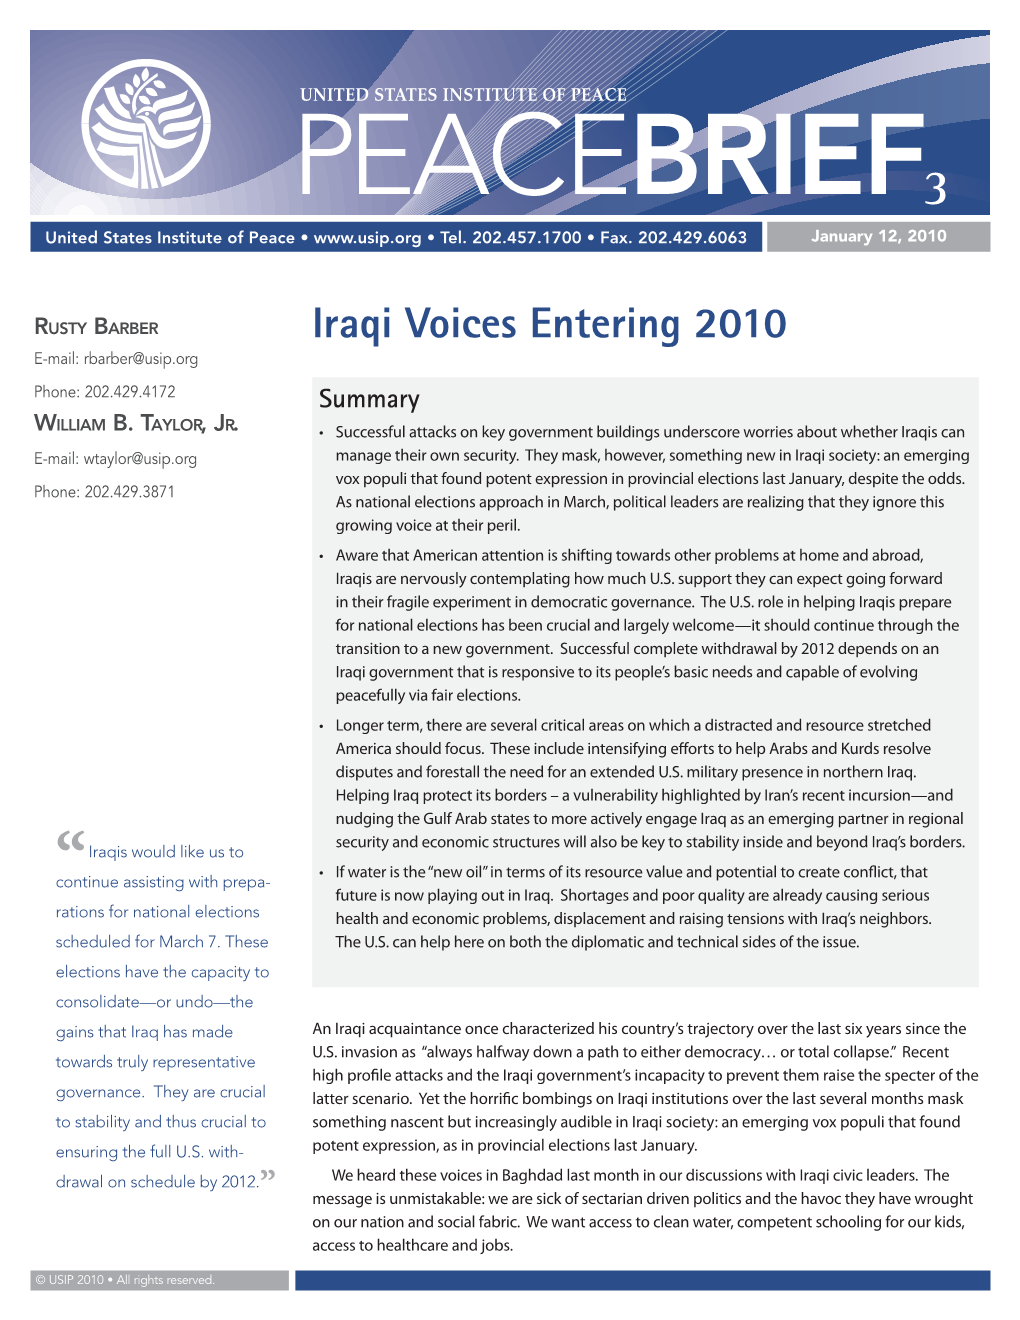 Iraqi Voices Entering 2010 E-Mail: Rbarber@Usip.Org Phone: 202.429.4172 Summary Wi L L I a M B